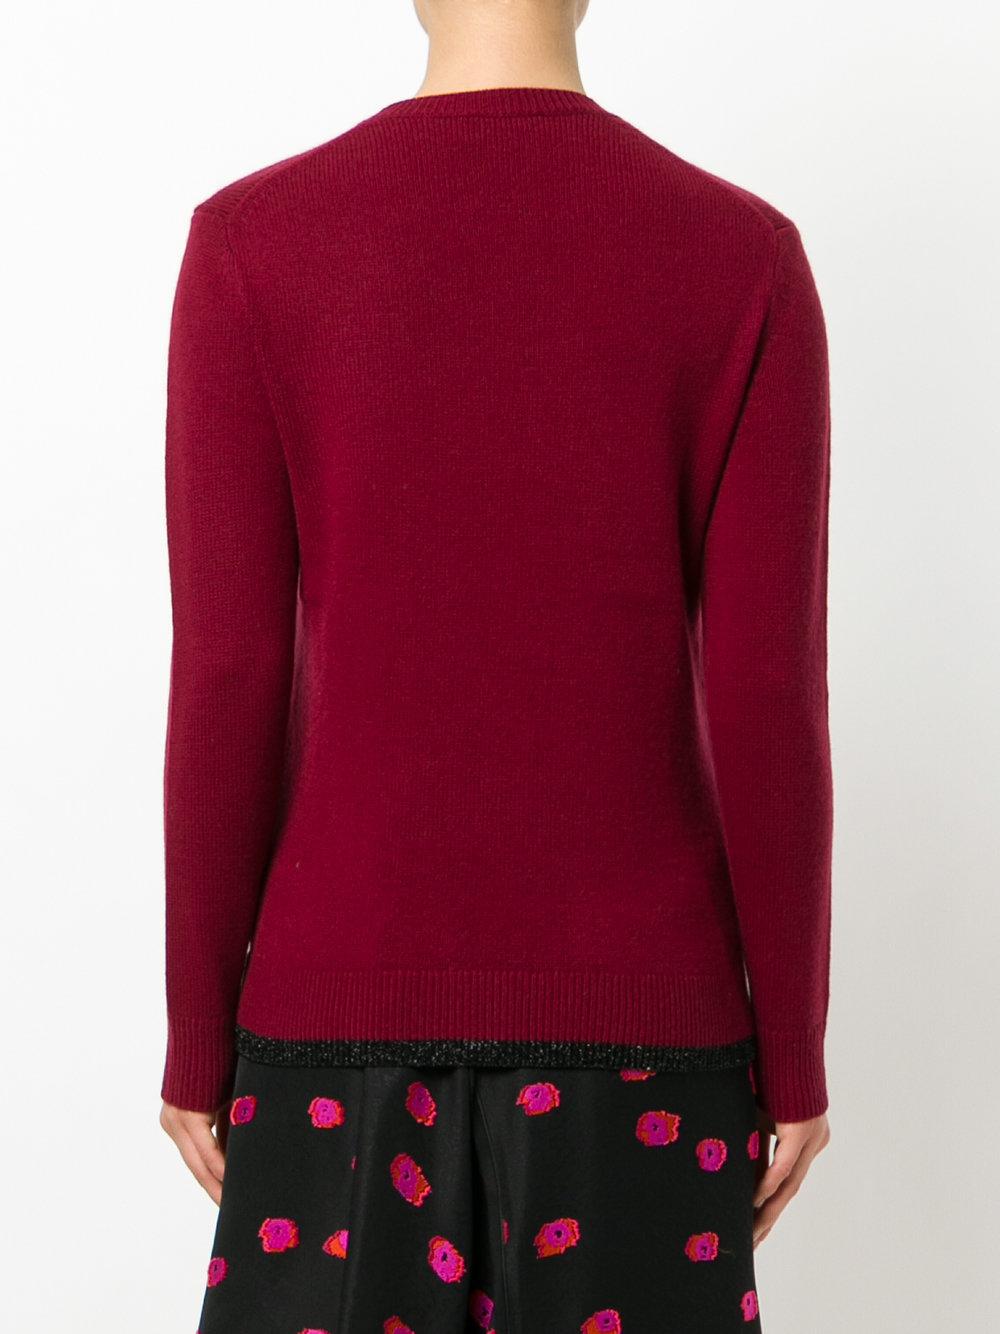 COACH Shark Sweater in Red - Lyst